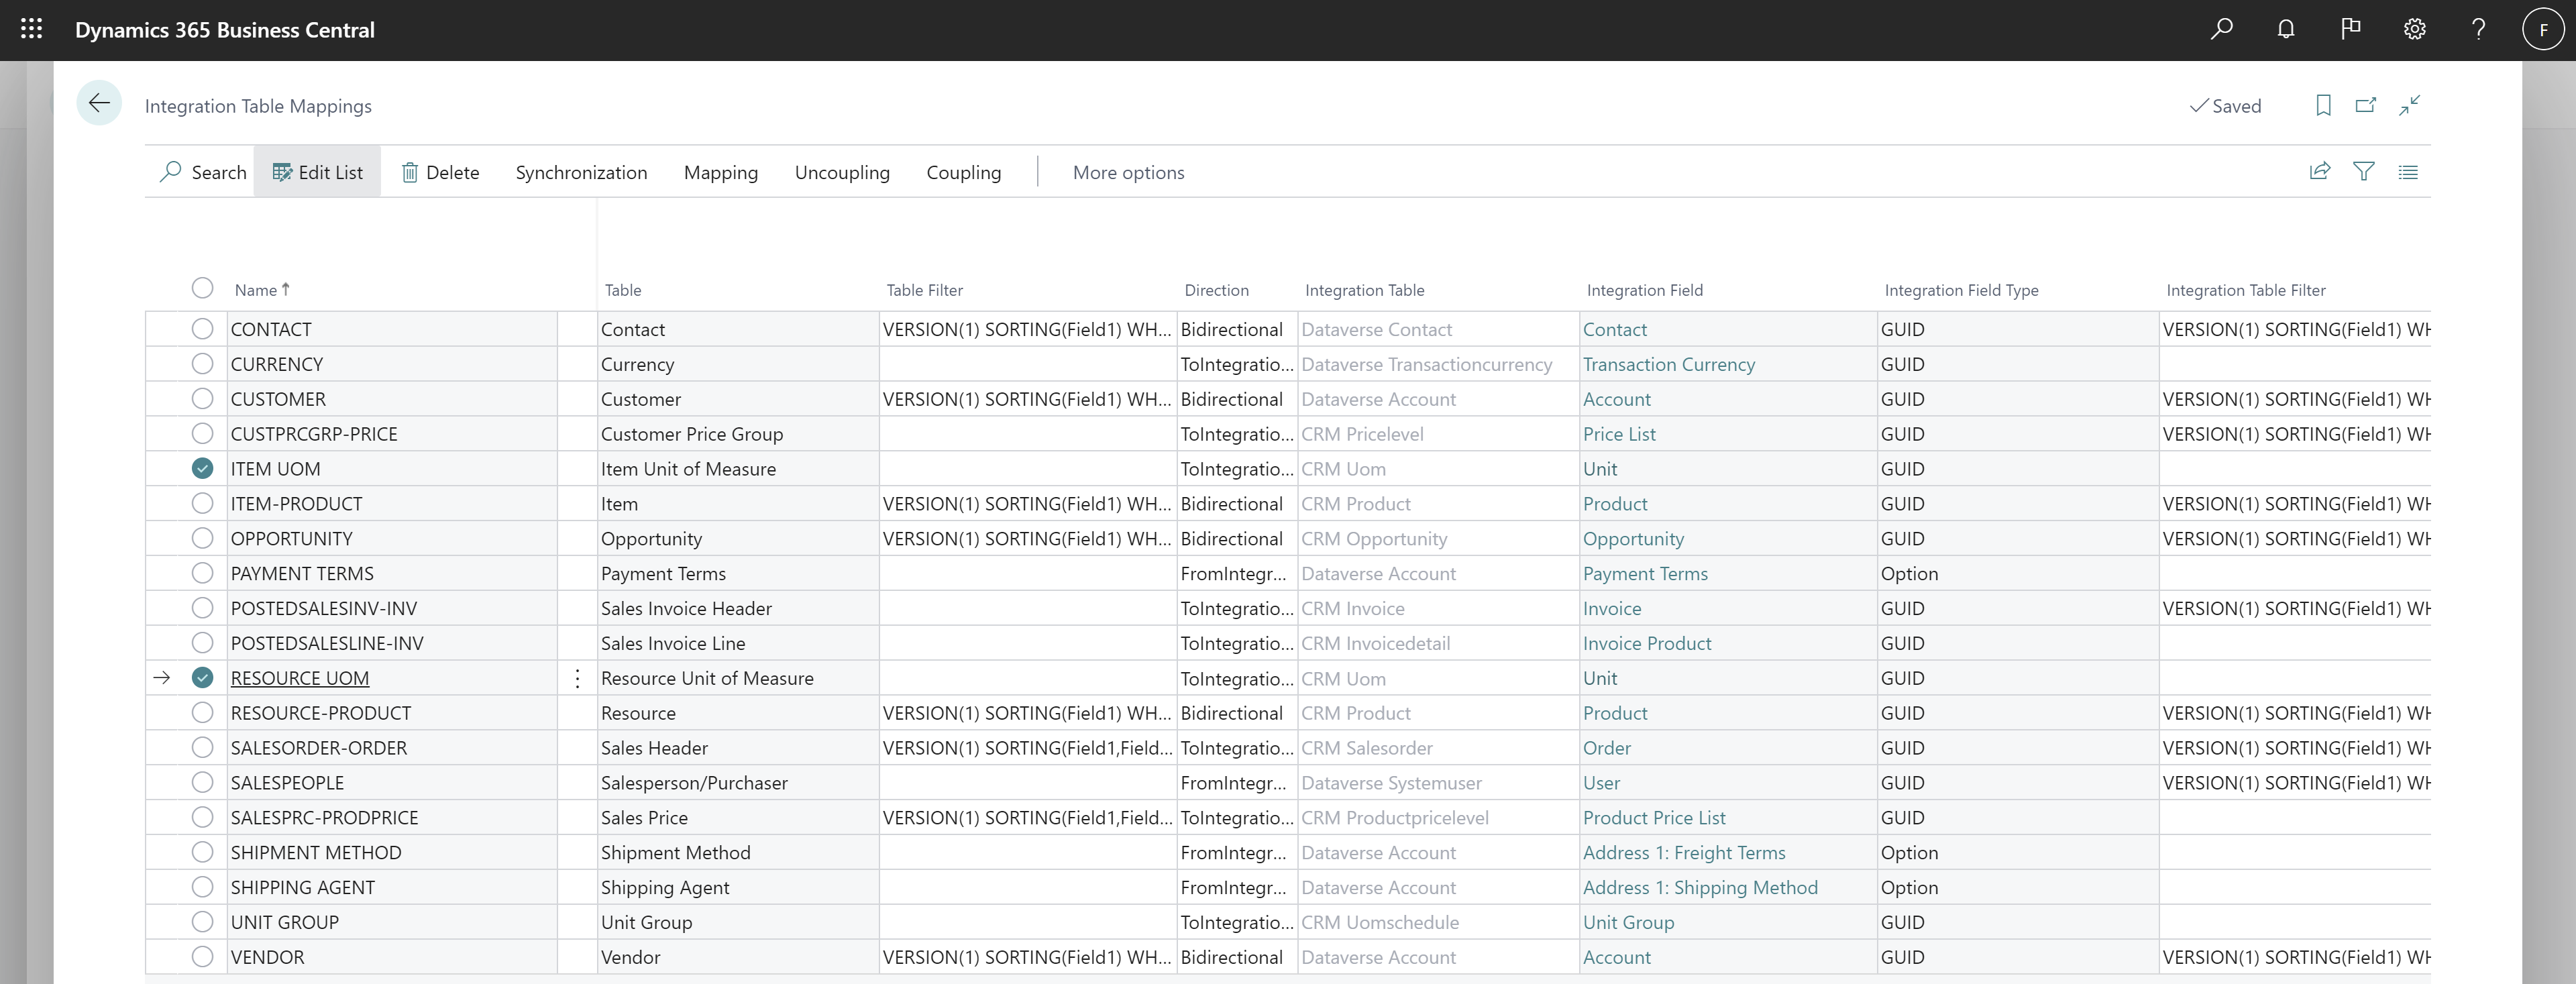 Shows new Item and Resource Unit of Measure mappings in Integration Table Mappings page.